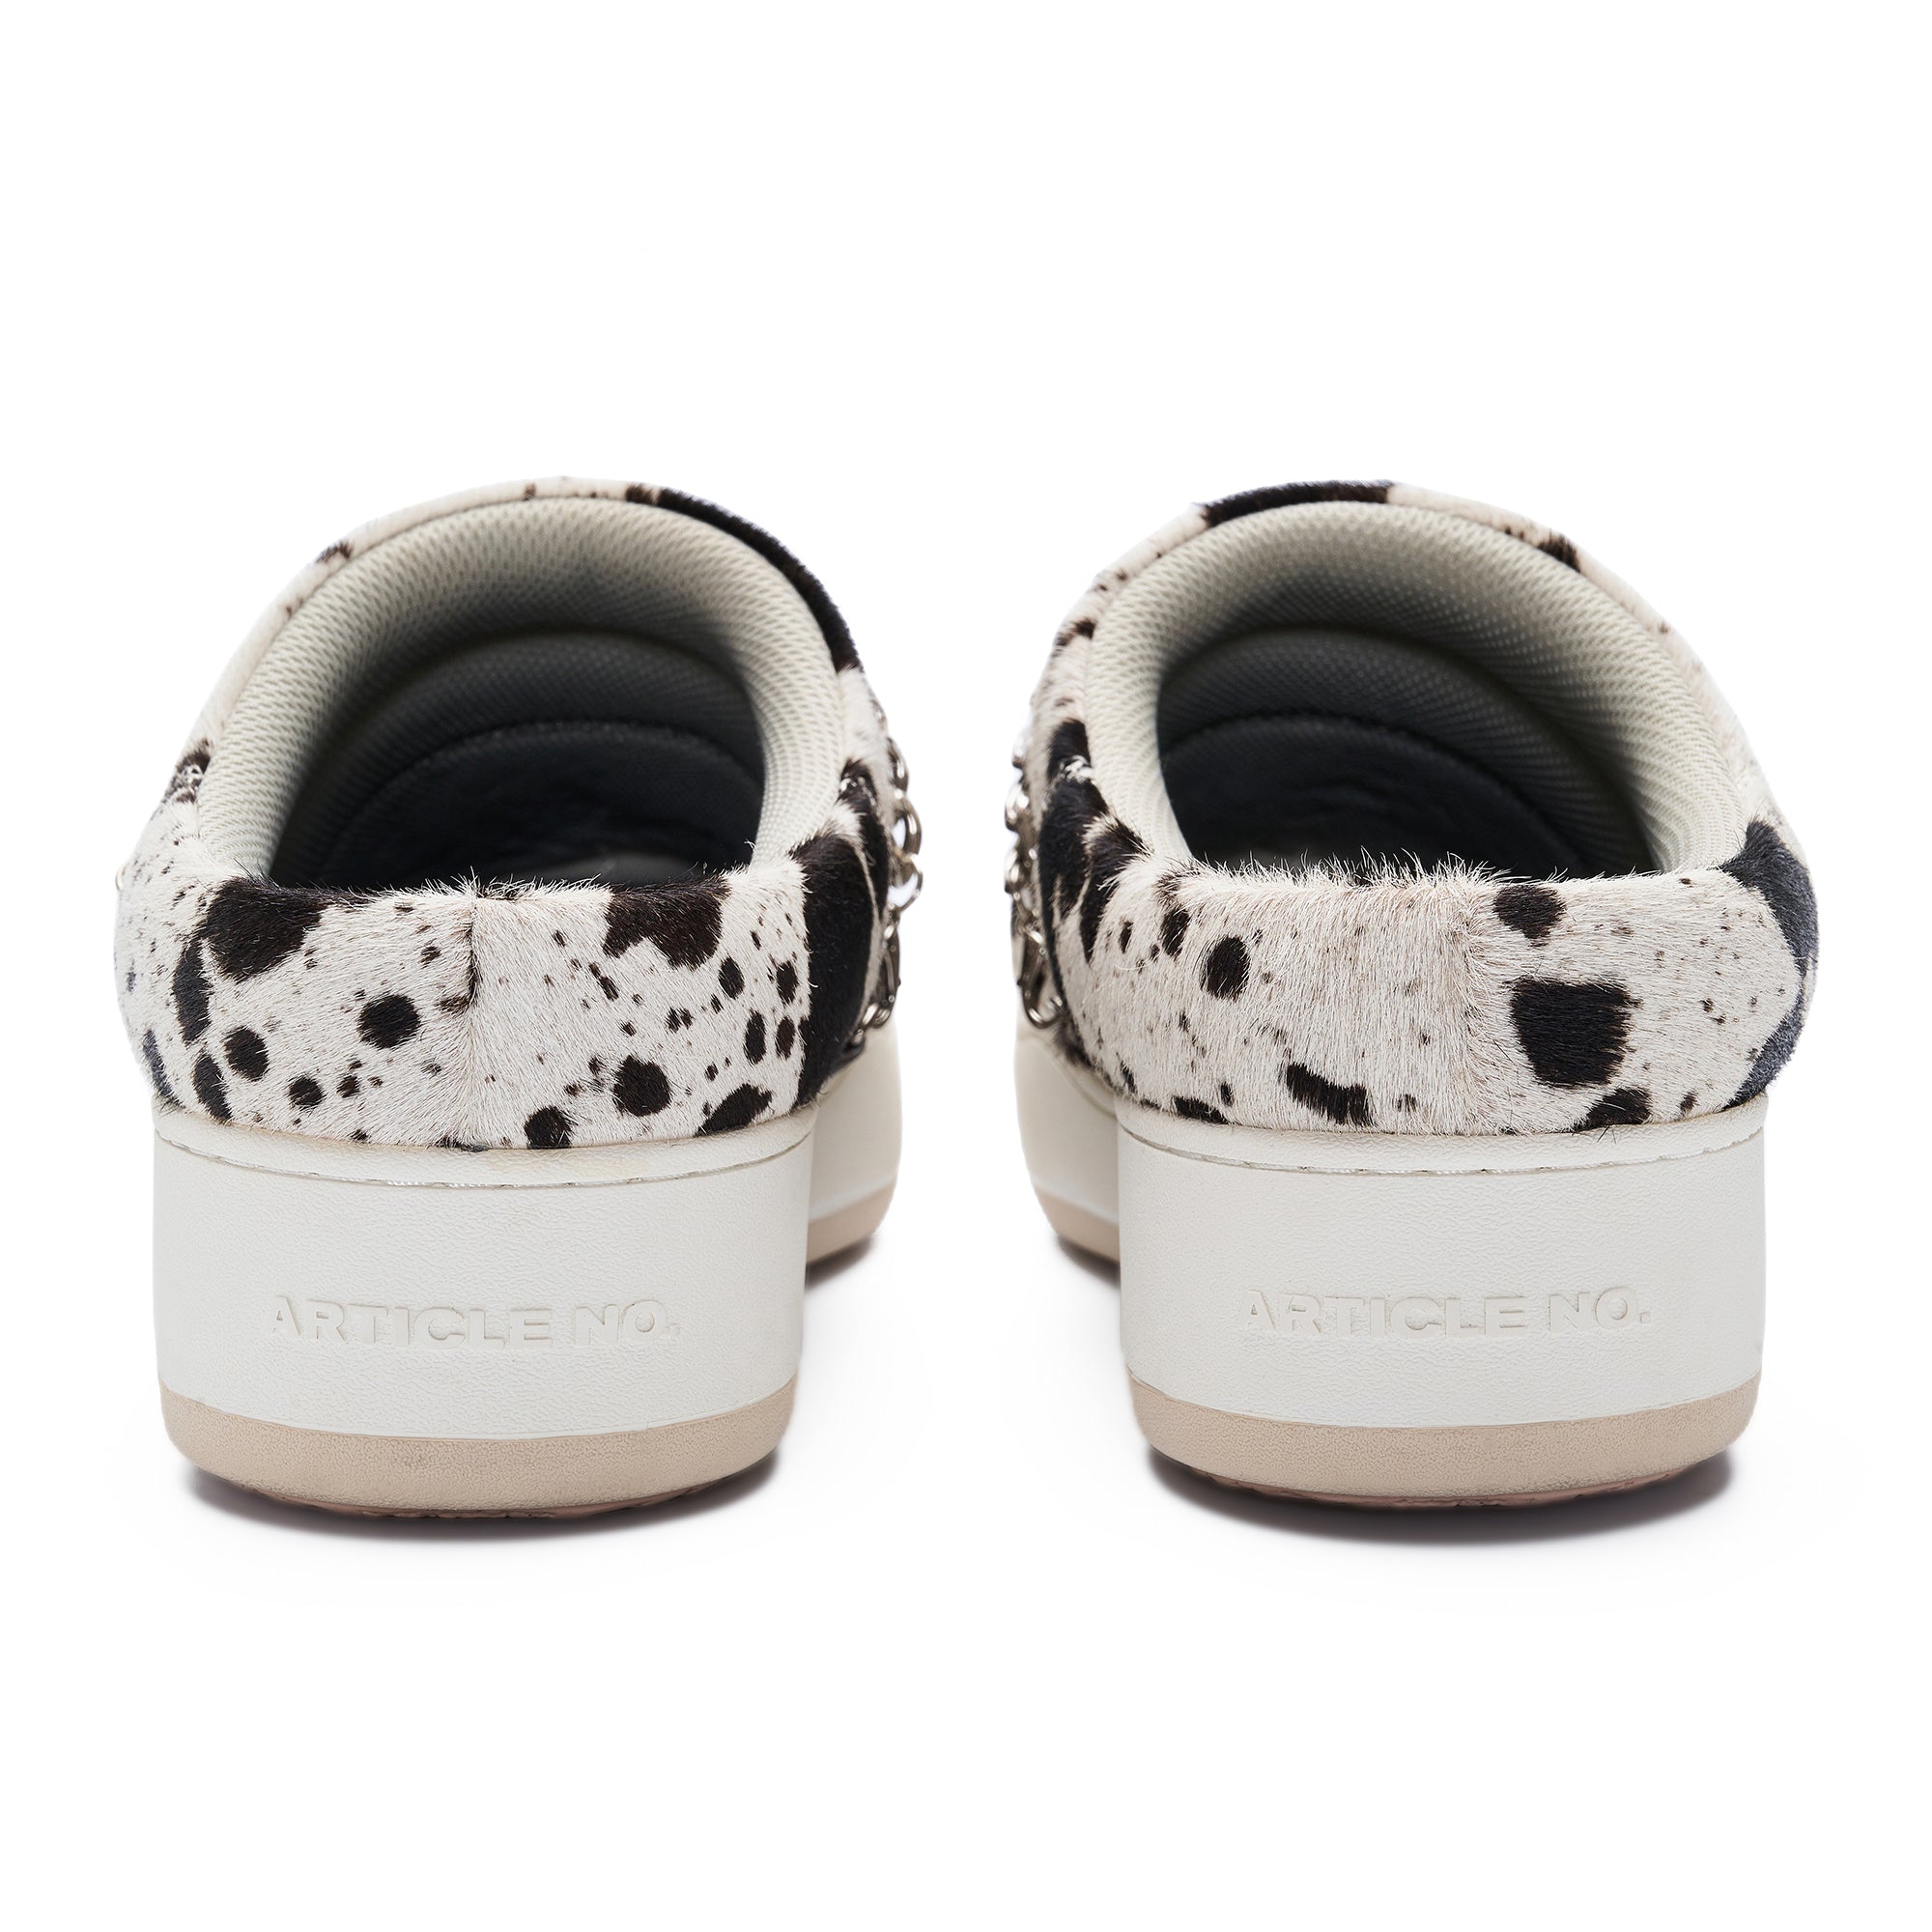 ARTICLE NO. 051X-9002F-23 BLACK AND WHITE COWHIDE BURGER MULE